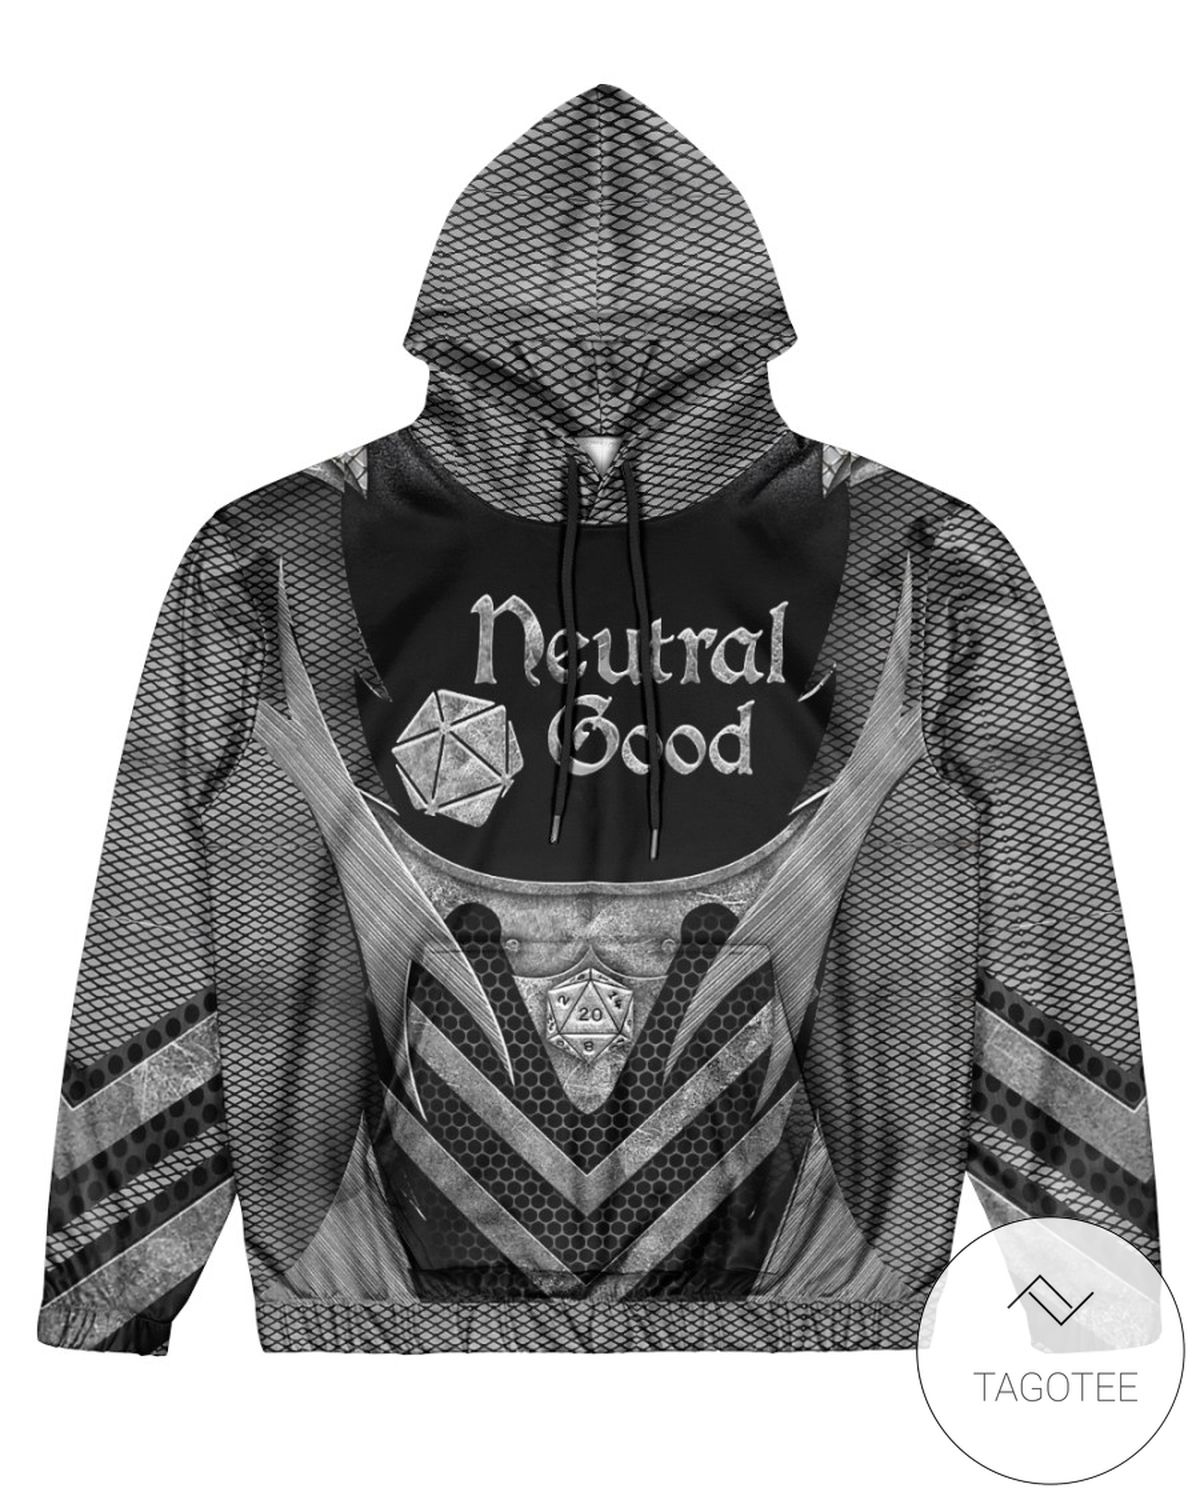 Neutral Good Black DnD Dungeons And Dragons 3d Hoodie